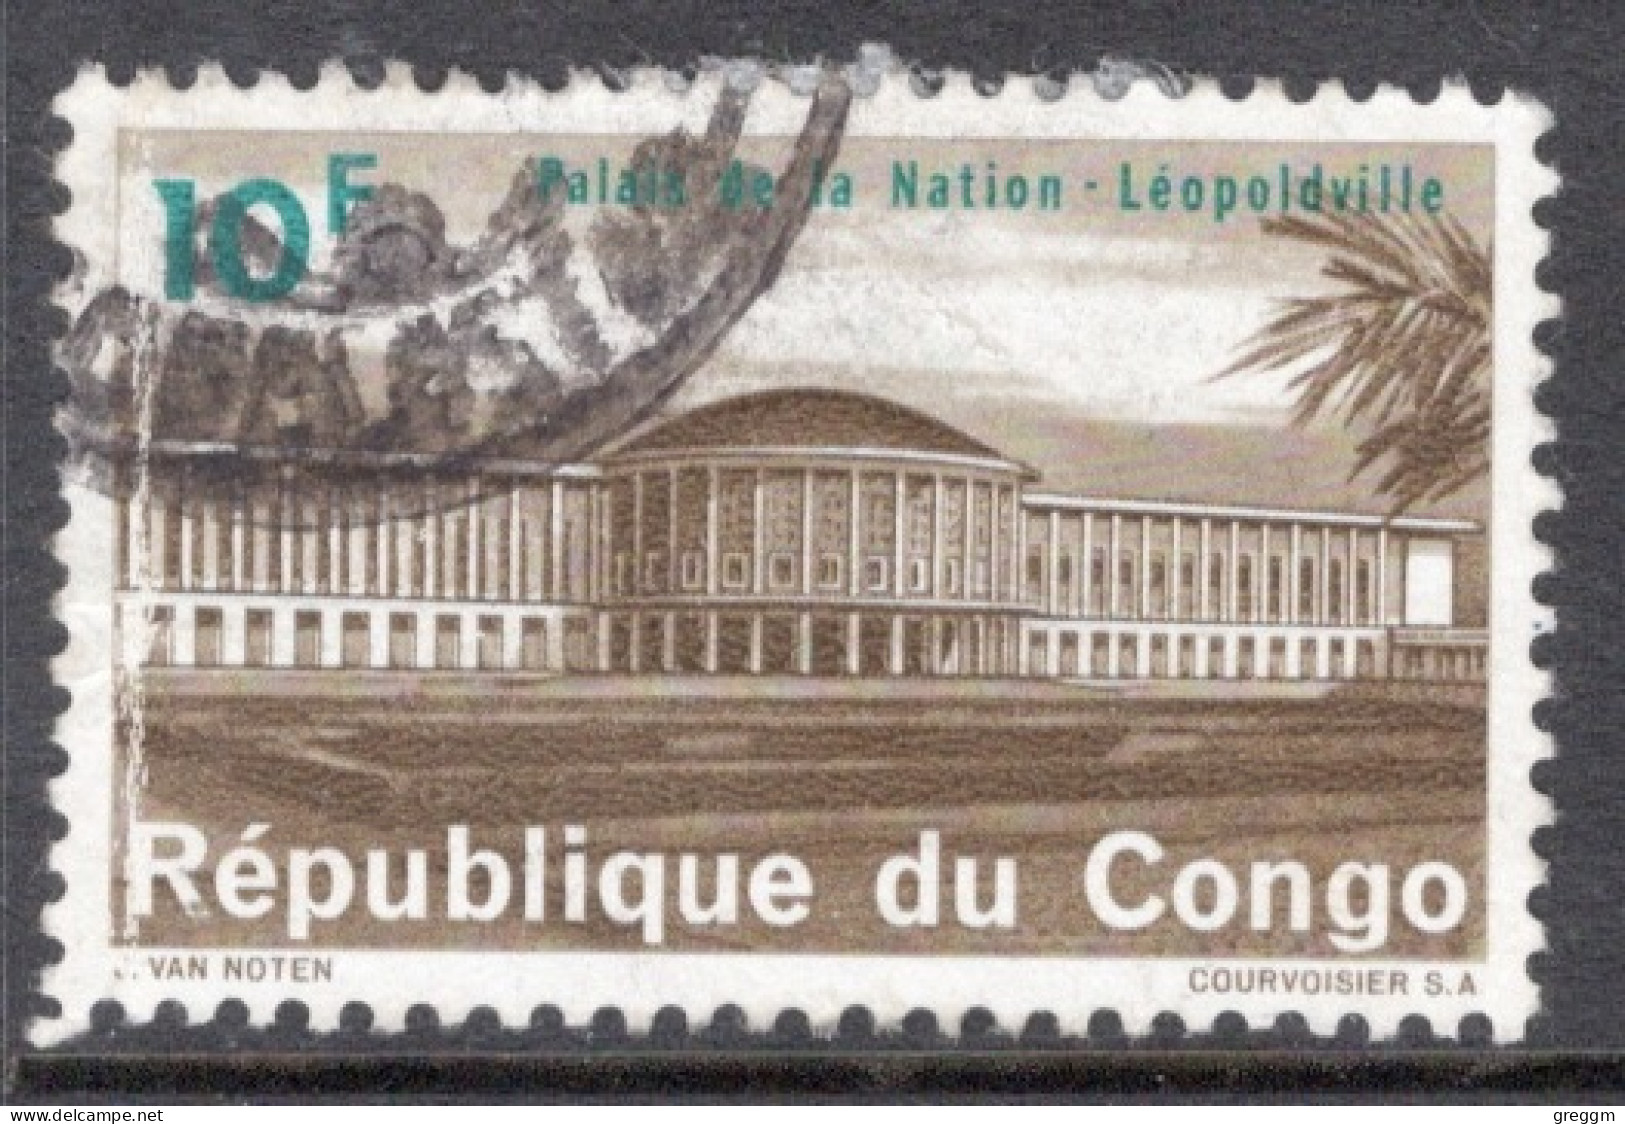 Kinshasa Congo 1964 Single 10f Stamp From The Definitive Set  National Palace, Leopoldville  In Fine Used. - Gebruikt